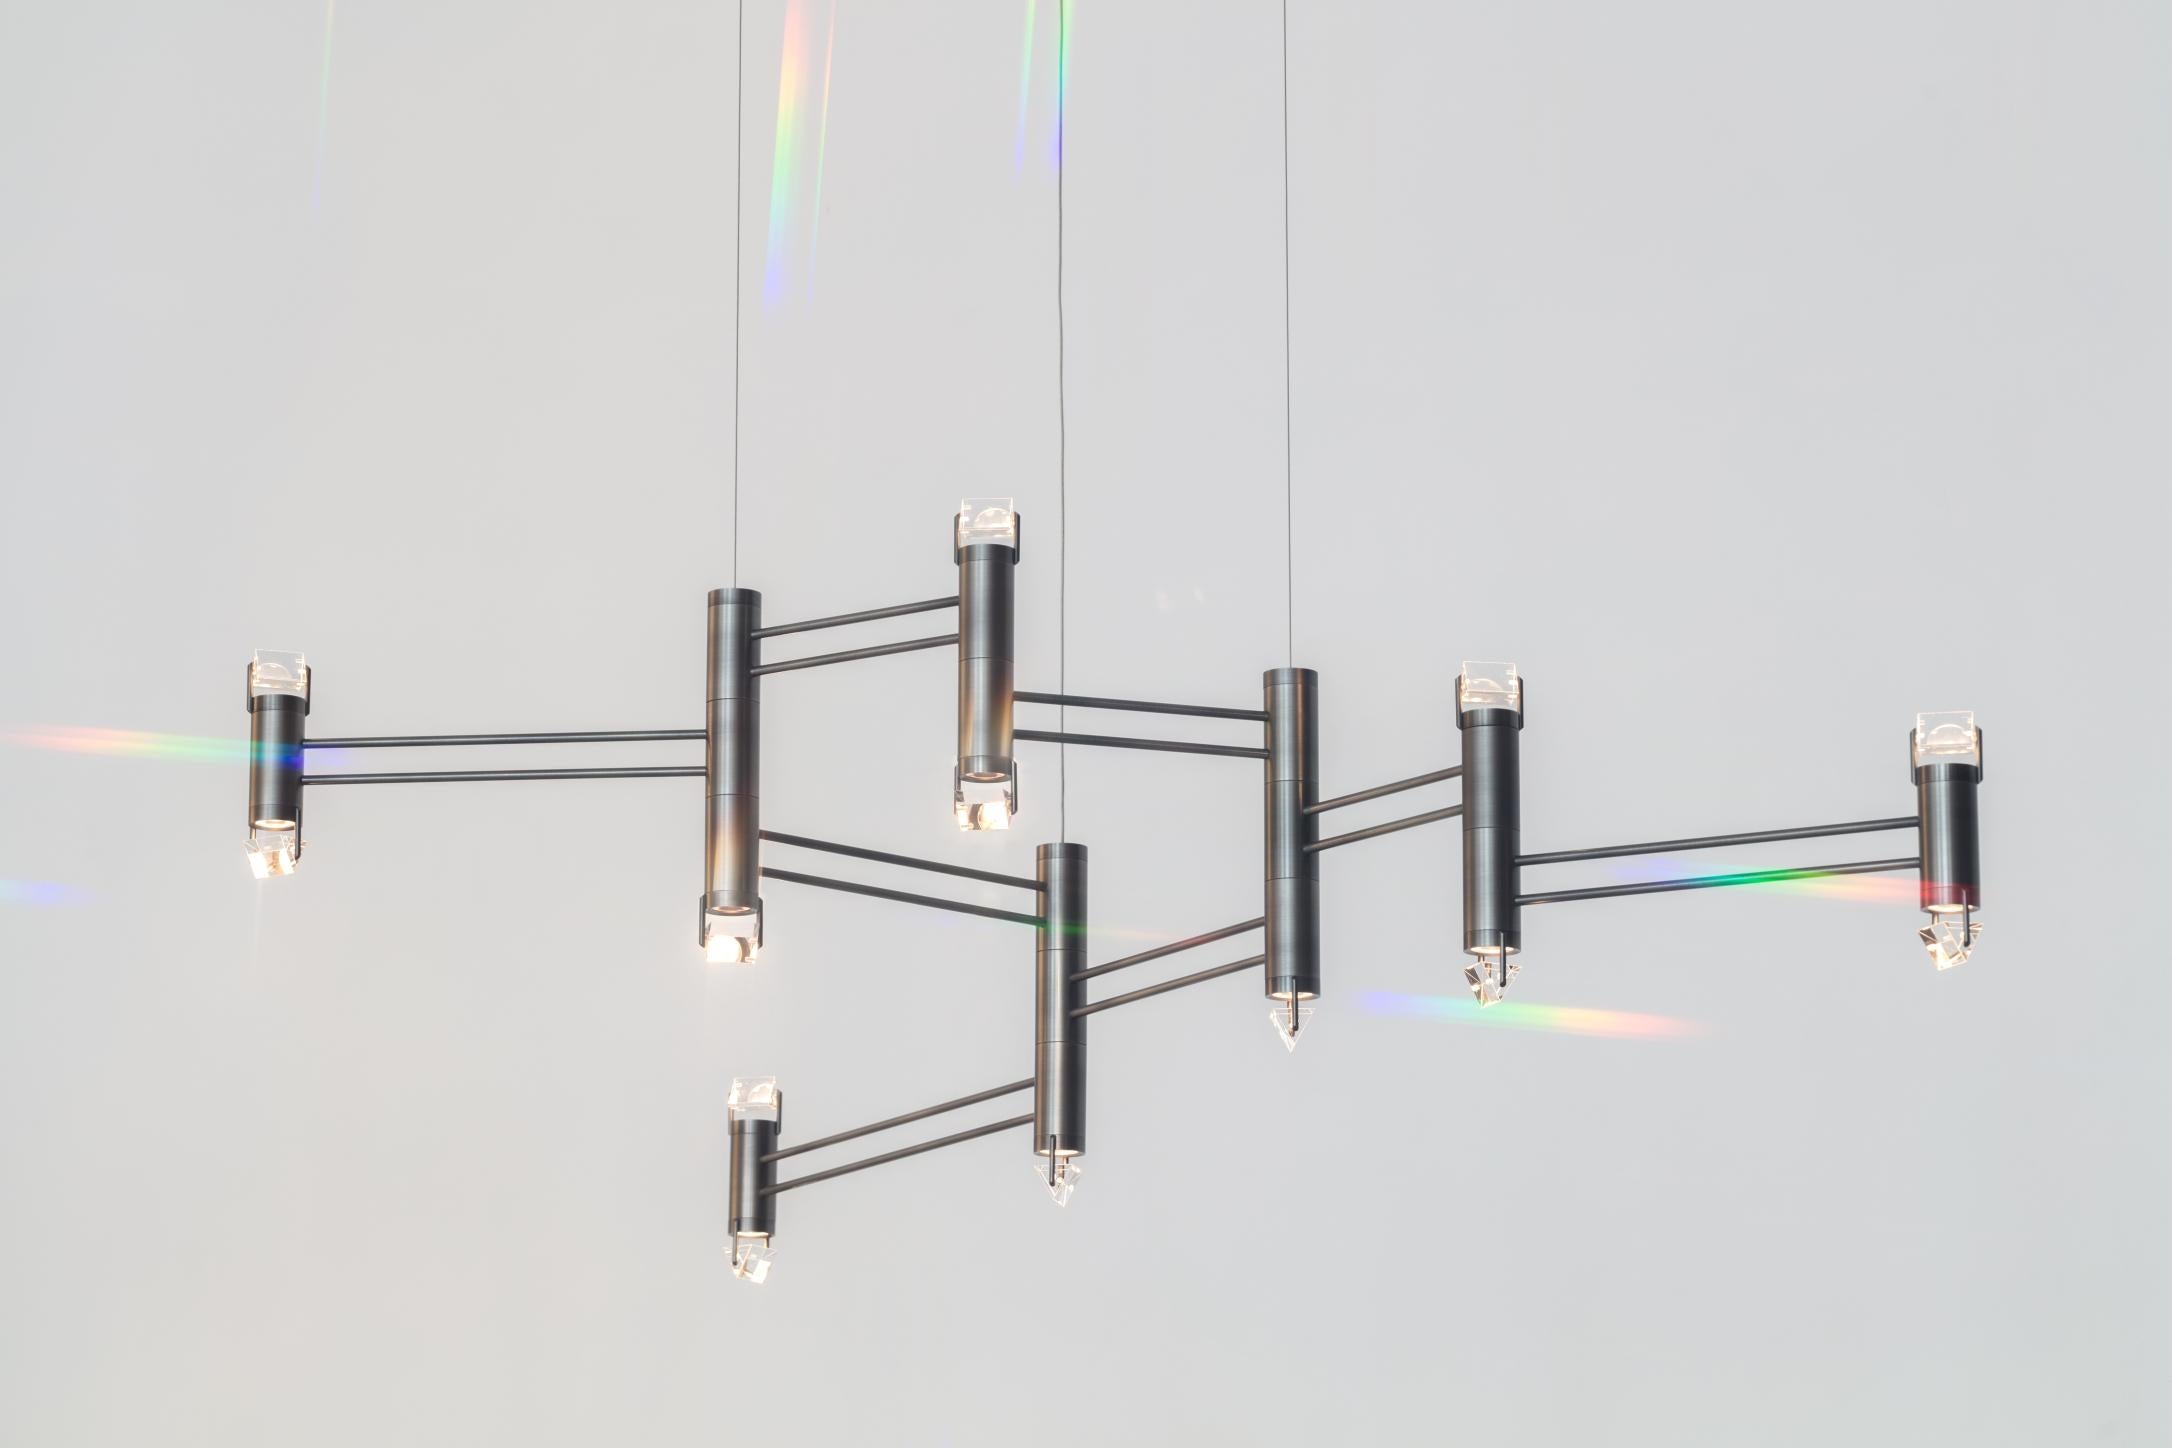 Aries was inspired by the artist Olafur Eliasson’s concept and set design for the ballet Tree of Codes where the dancers wore all-black suits highlighted with LEDs. The Polished Nickel stems create a minimal form to position bodies of light topped